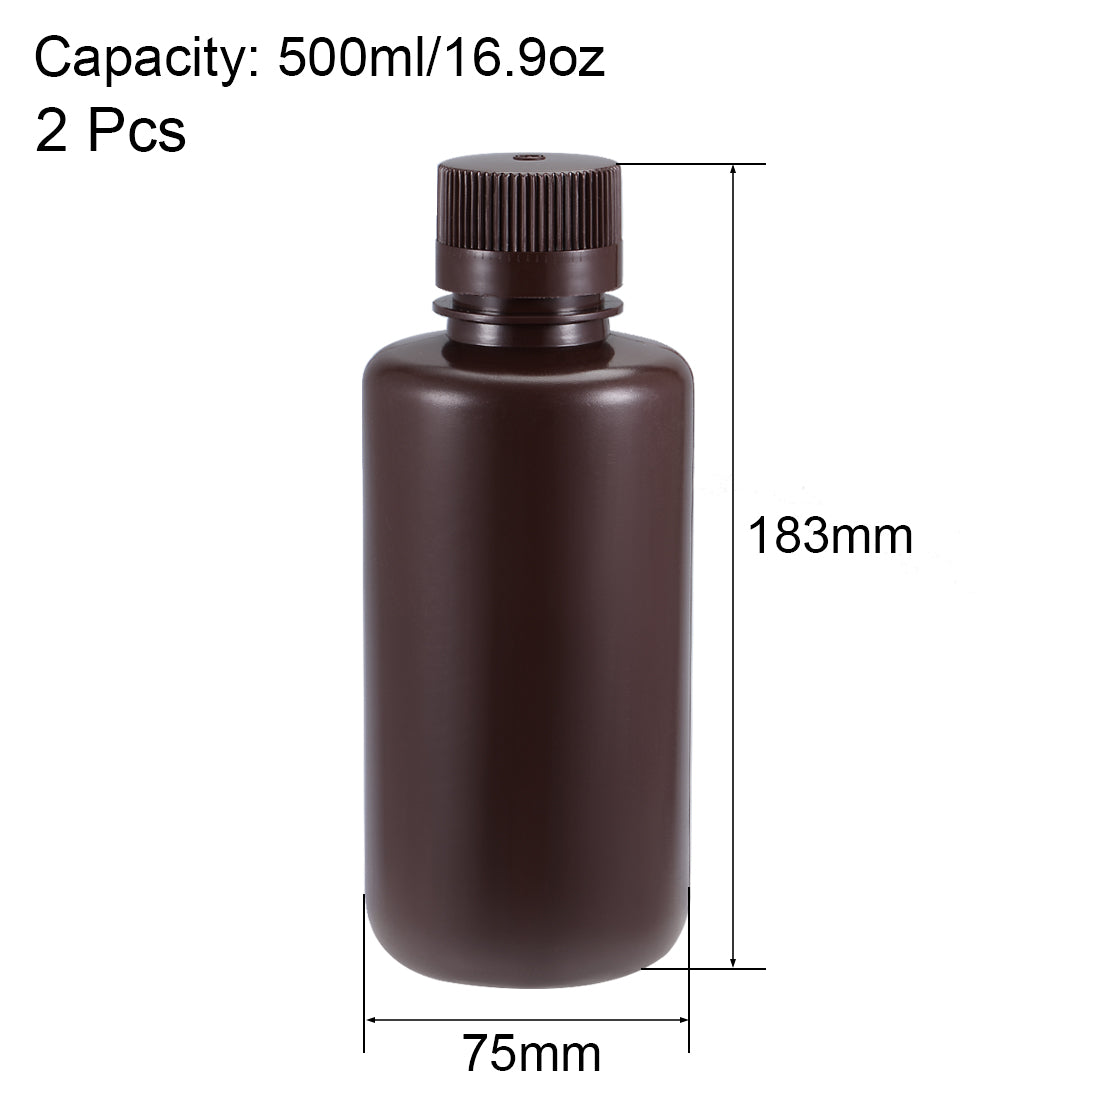 uxcell Uxcell Plastic Lab Chemical Reagent Bottle 500ml/16.9oz Small Mouth Sample Sealing Liquid Storage Container Brown 2pcs